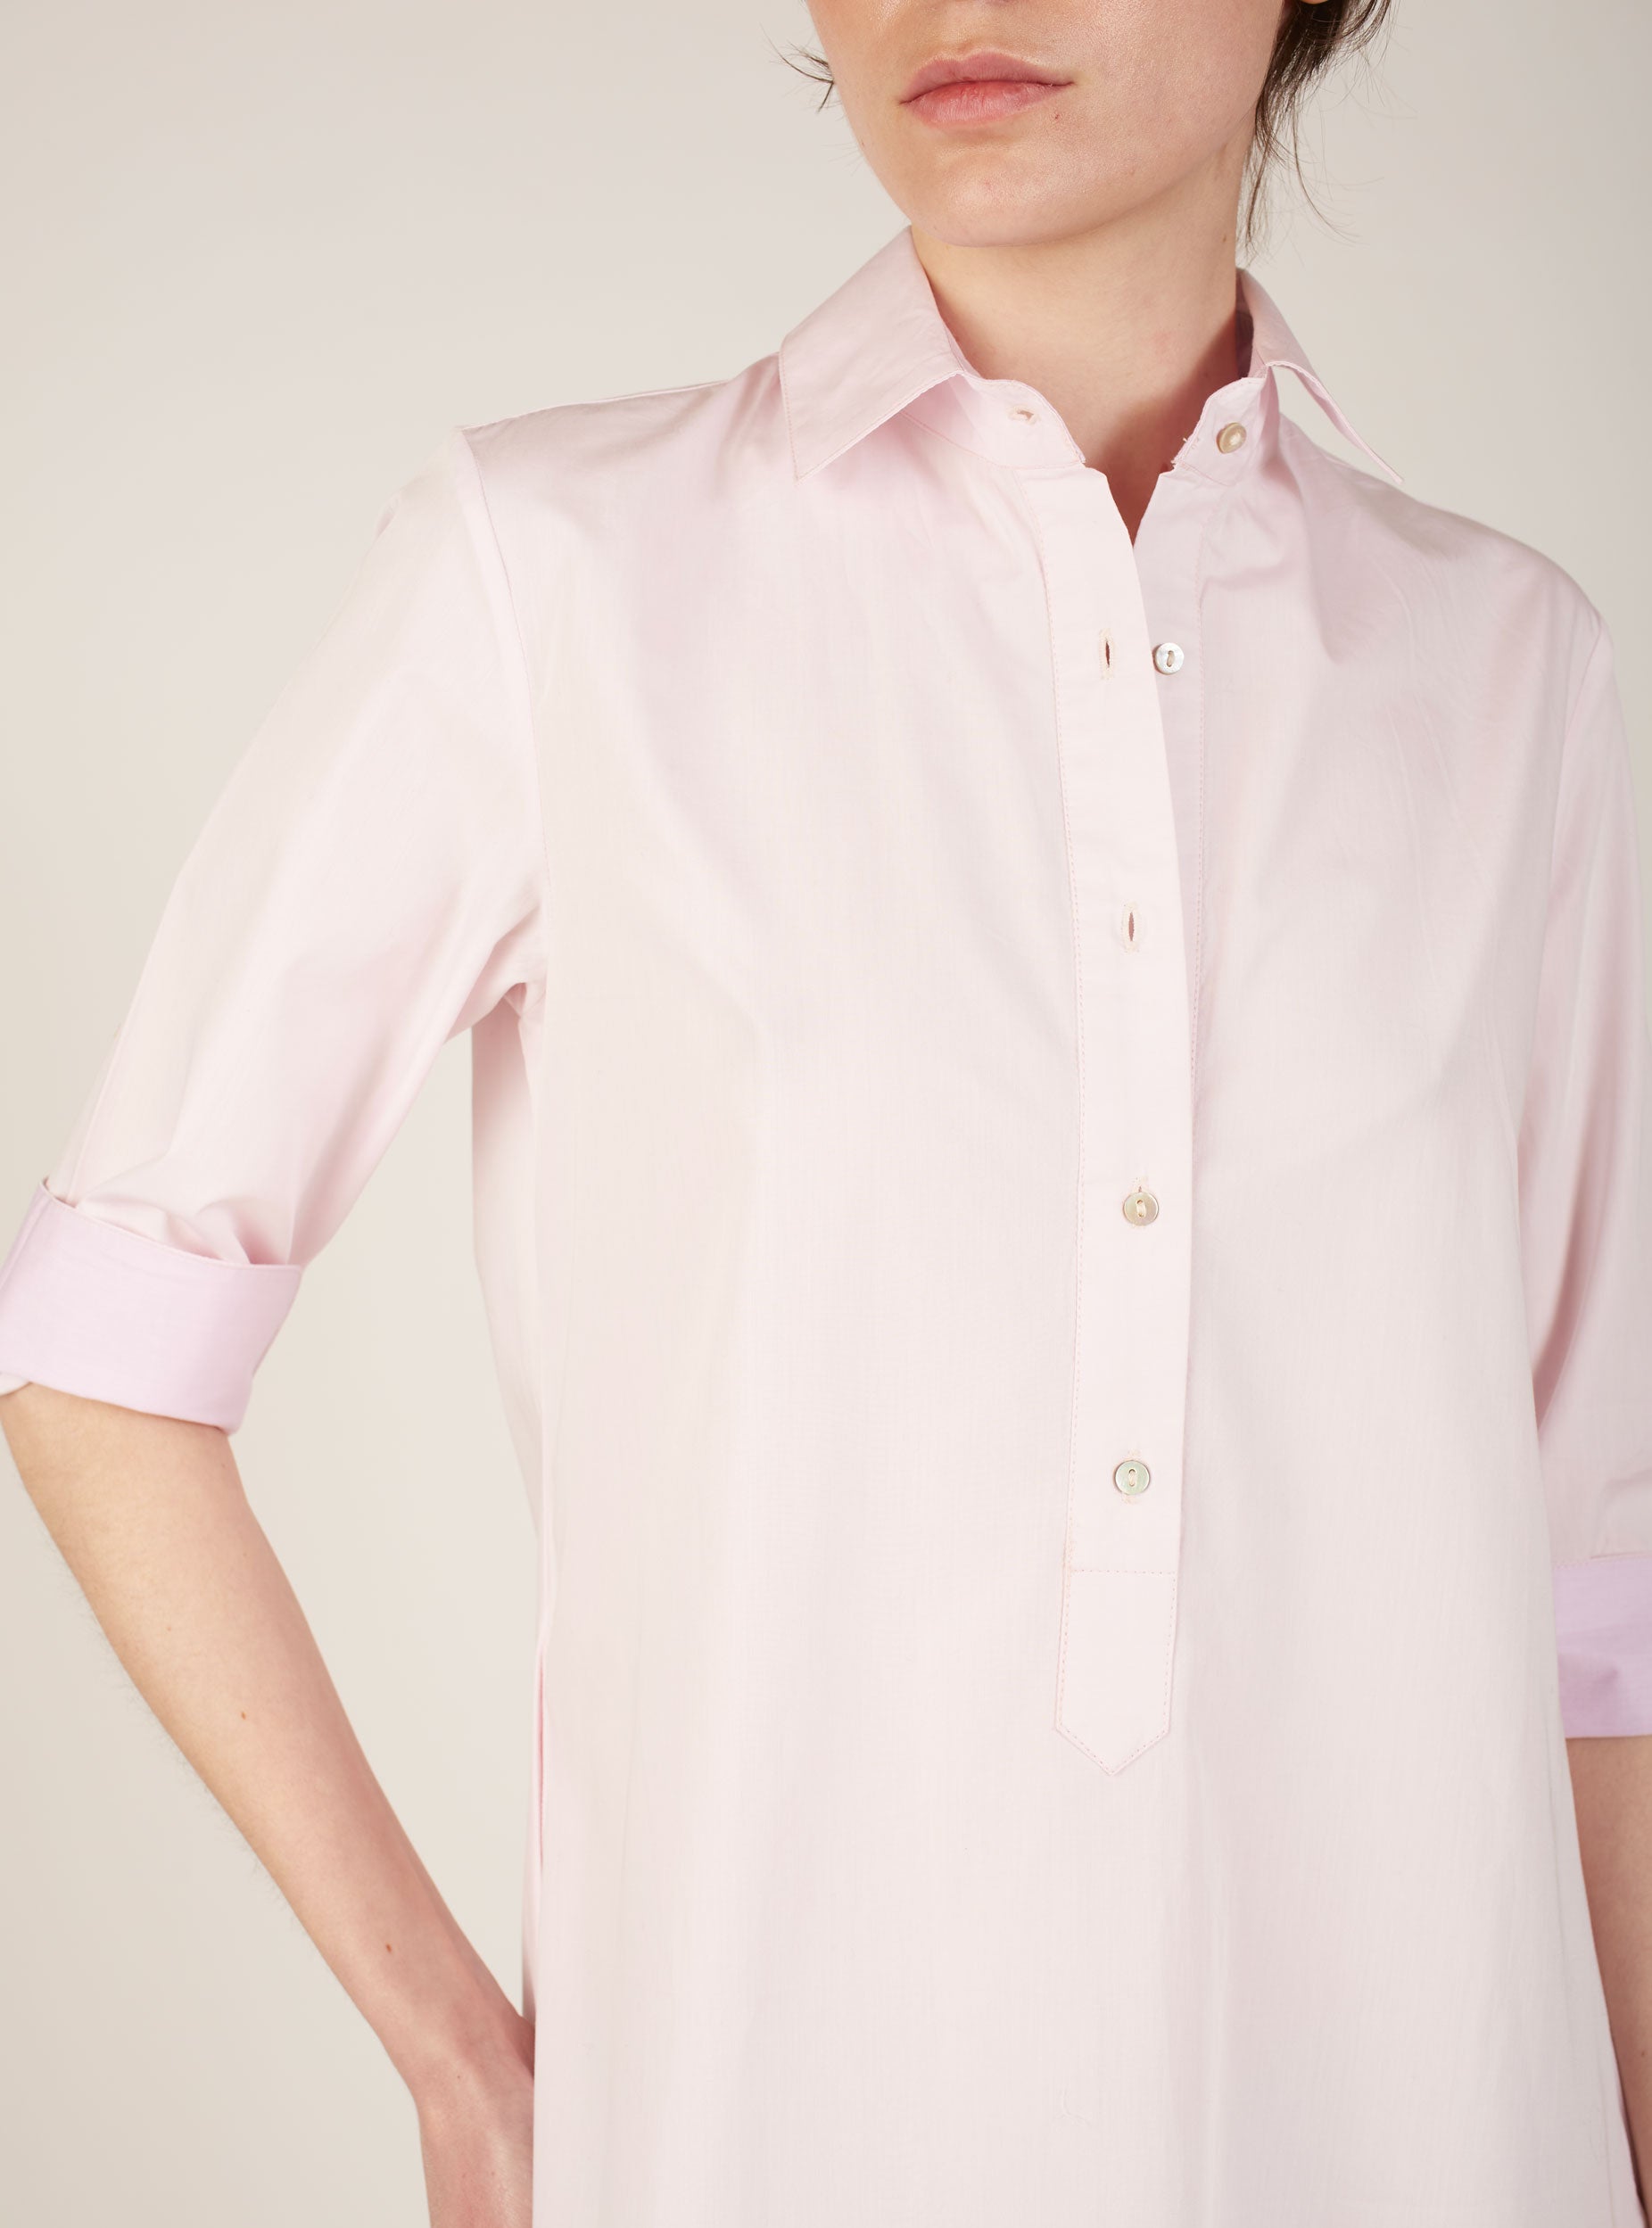 Detail of Angelica Pink shirt Dress by Thierry Colson